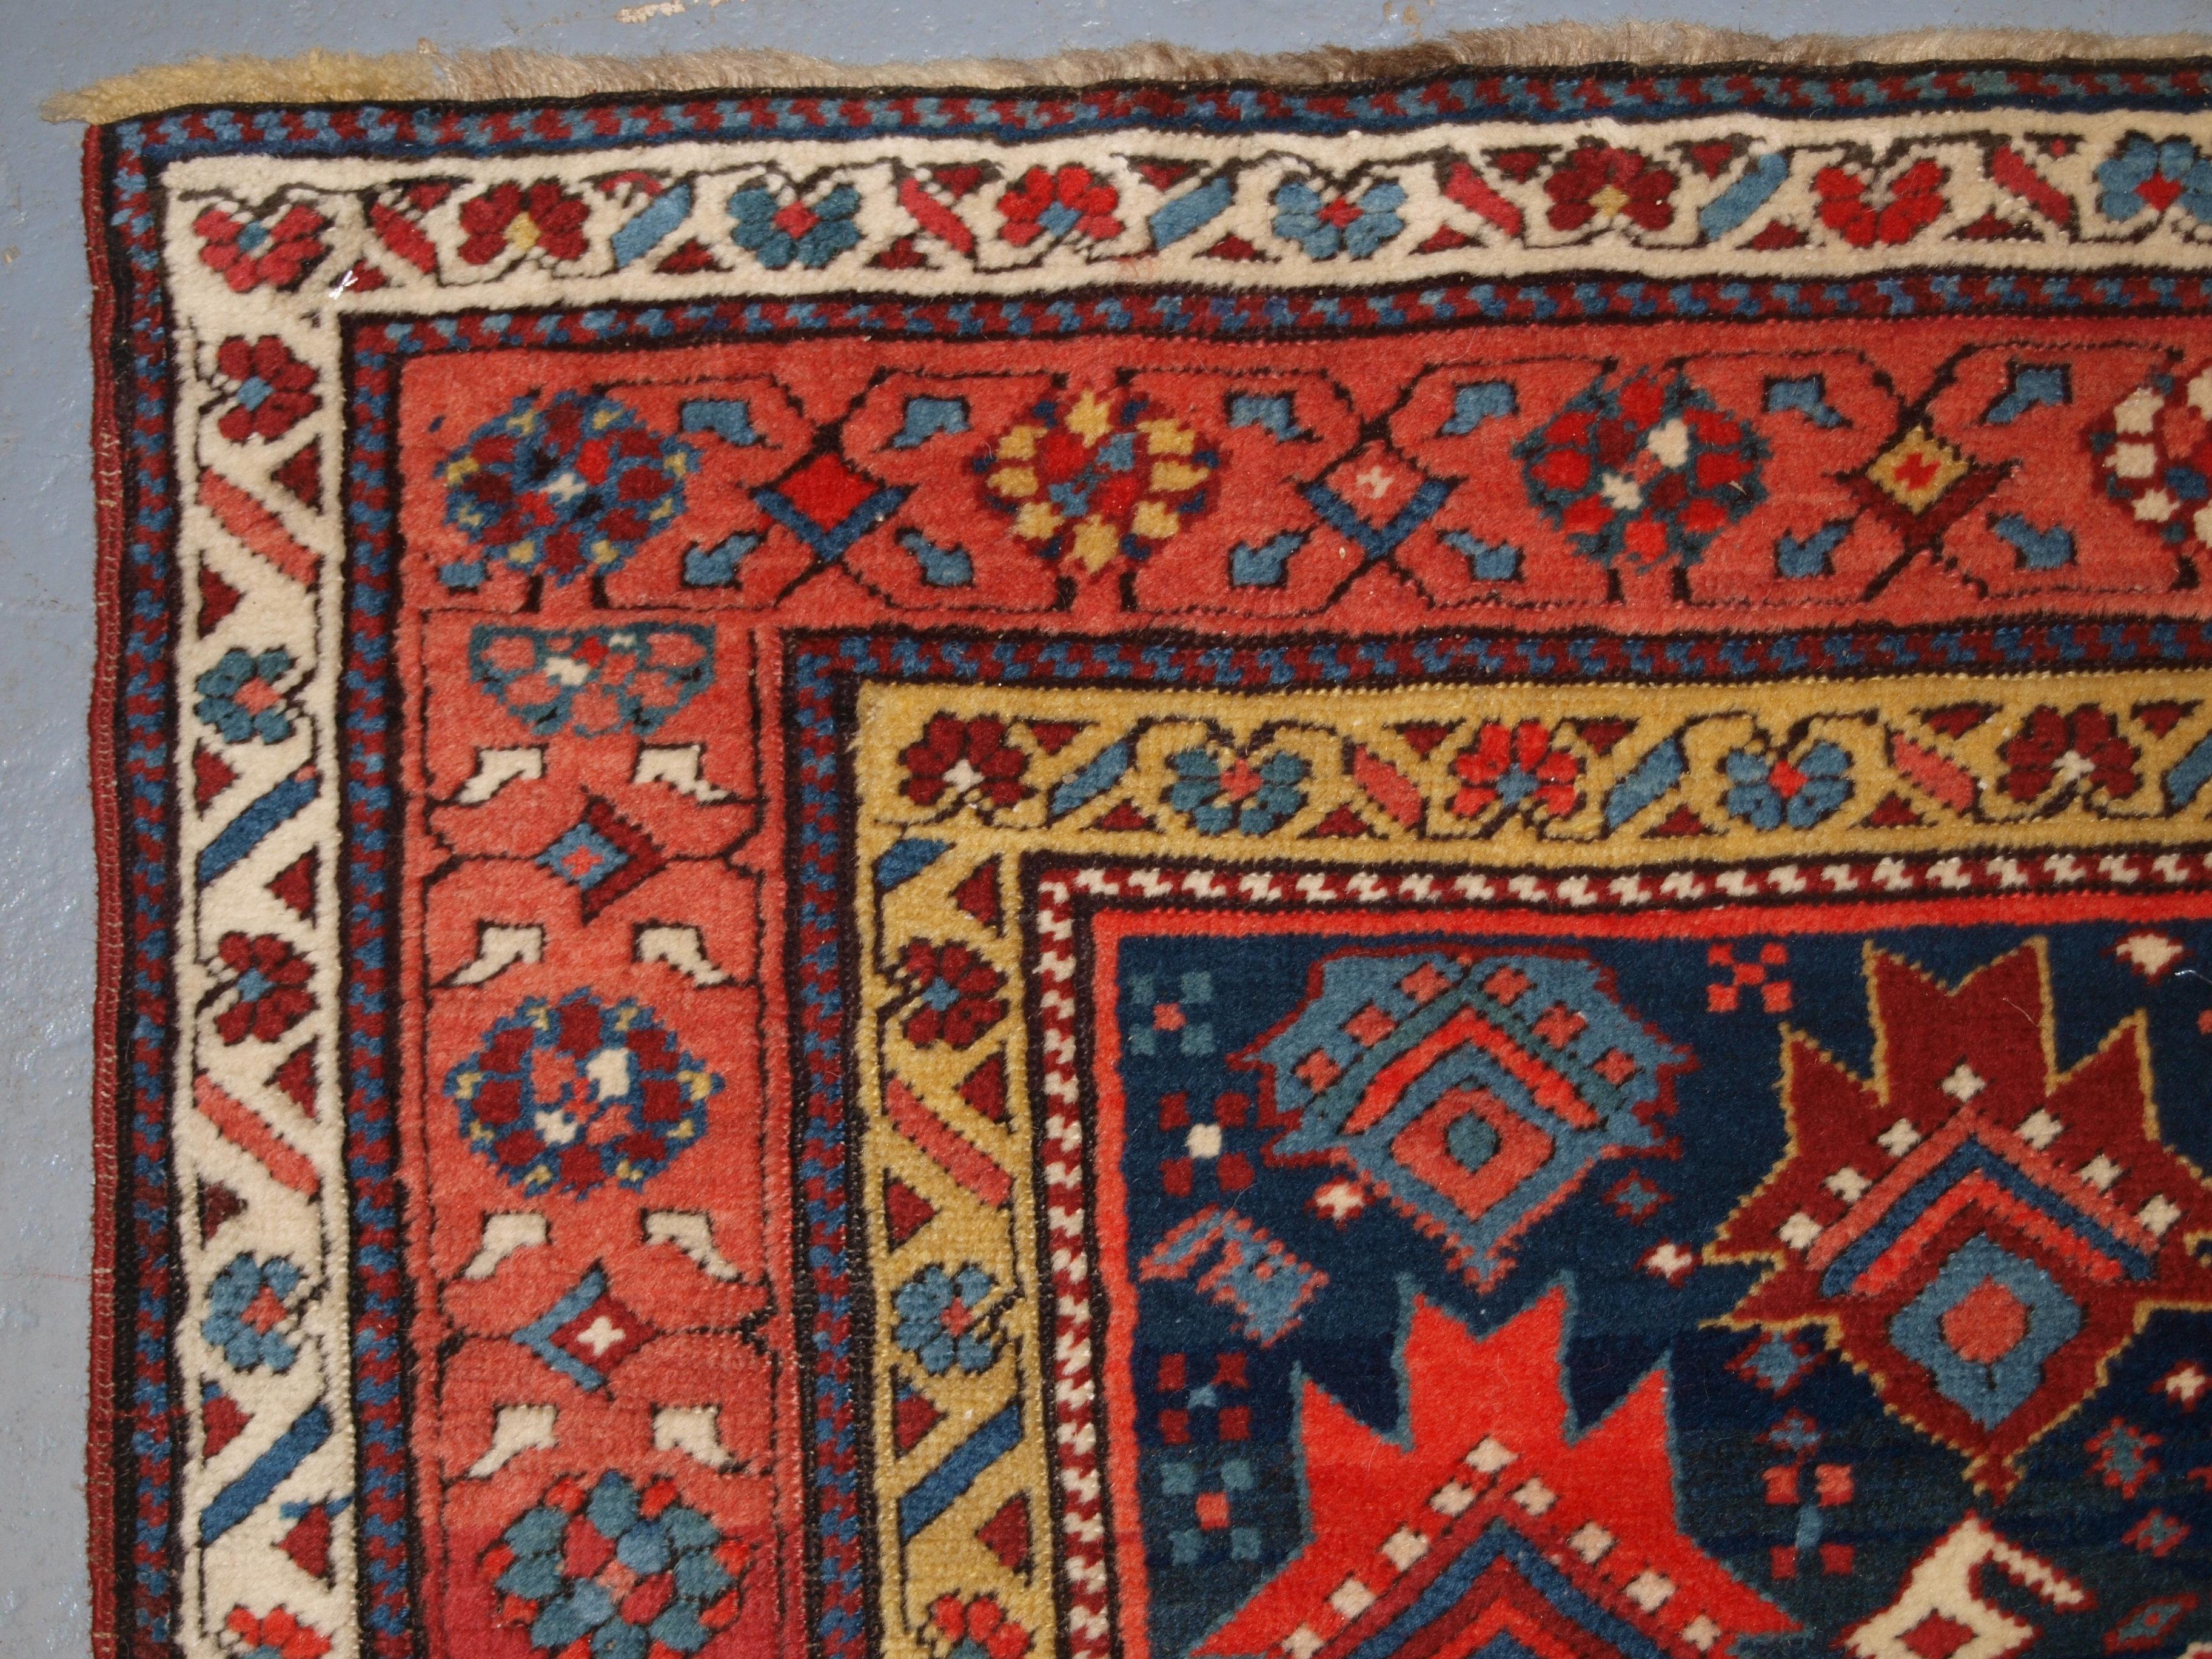 Floral red and yellow corner design of antique south caucasian runner